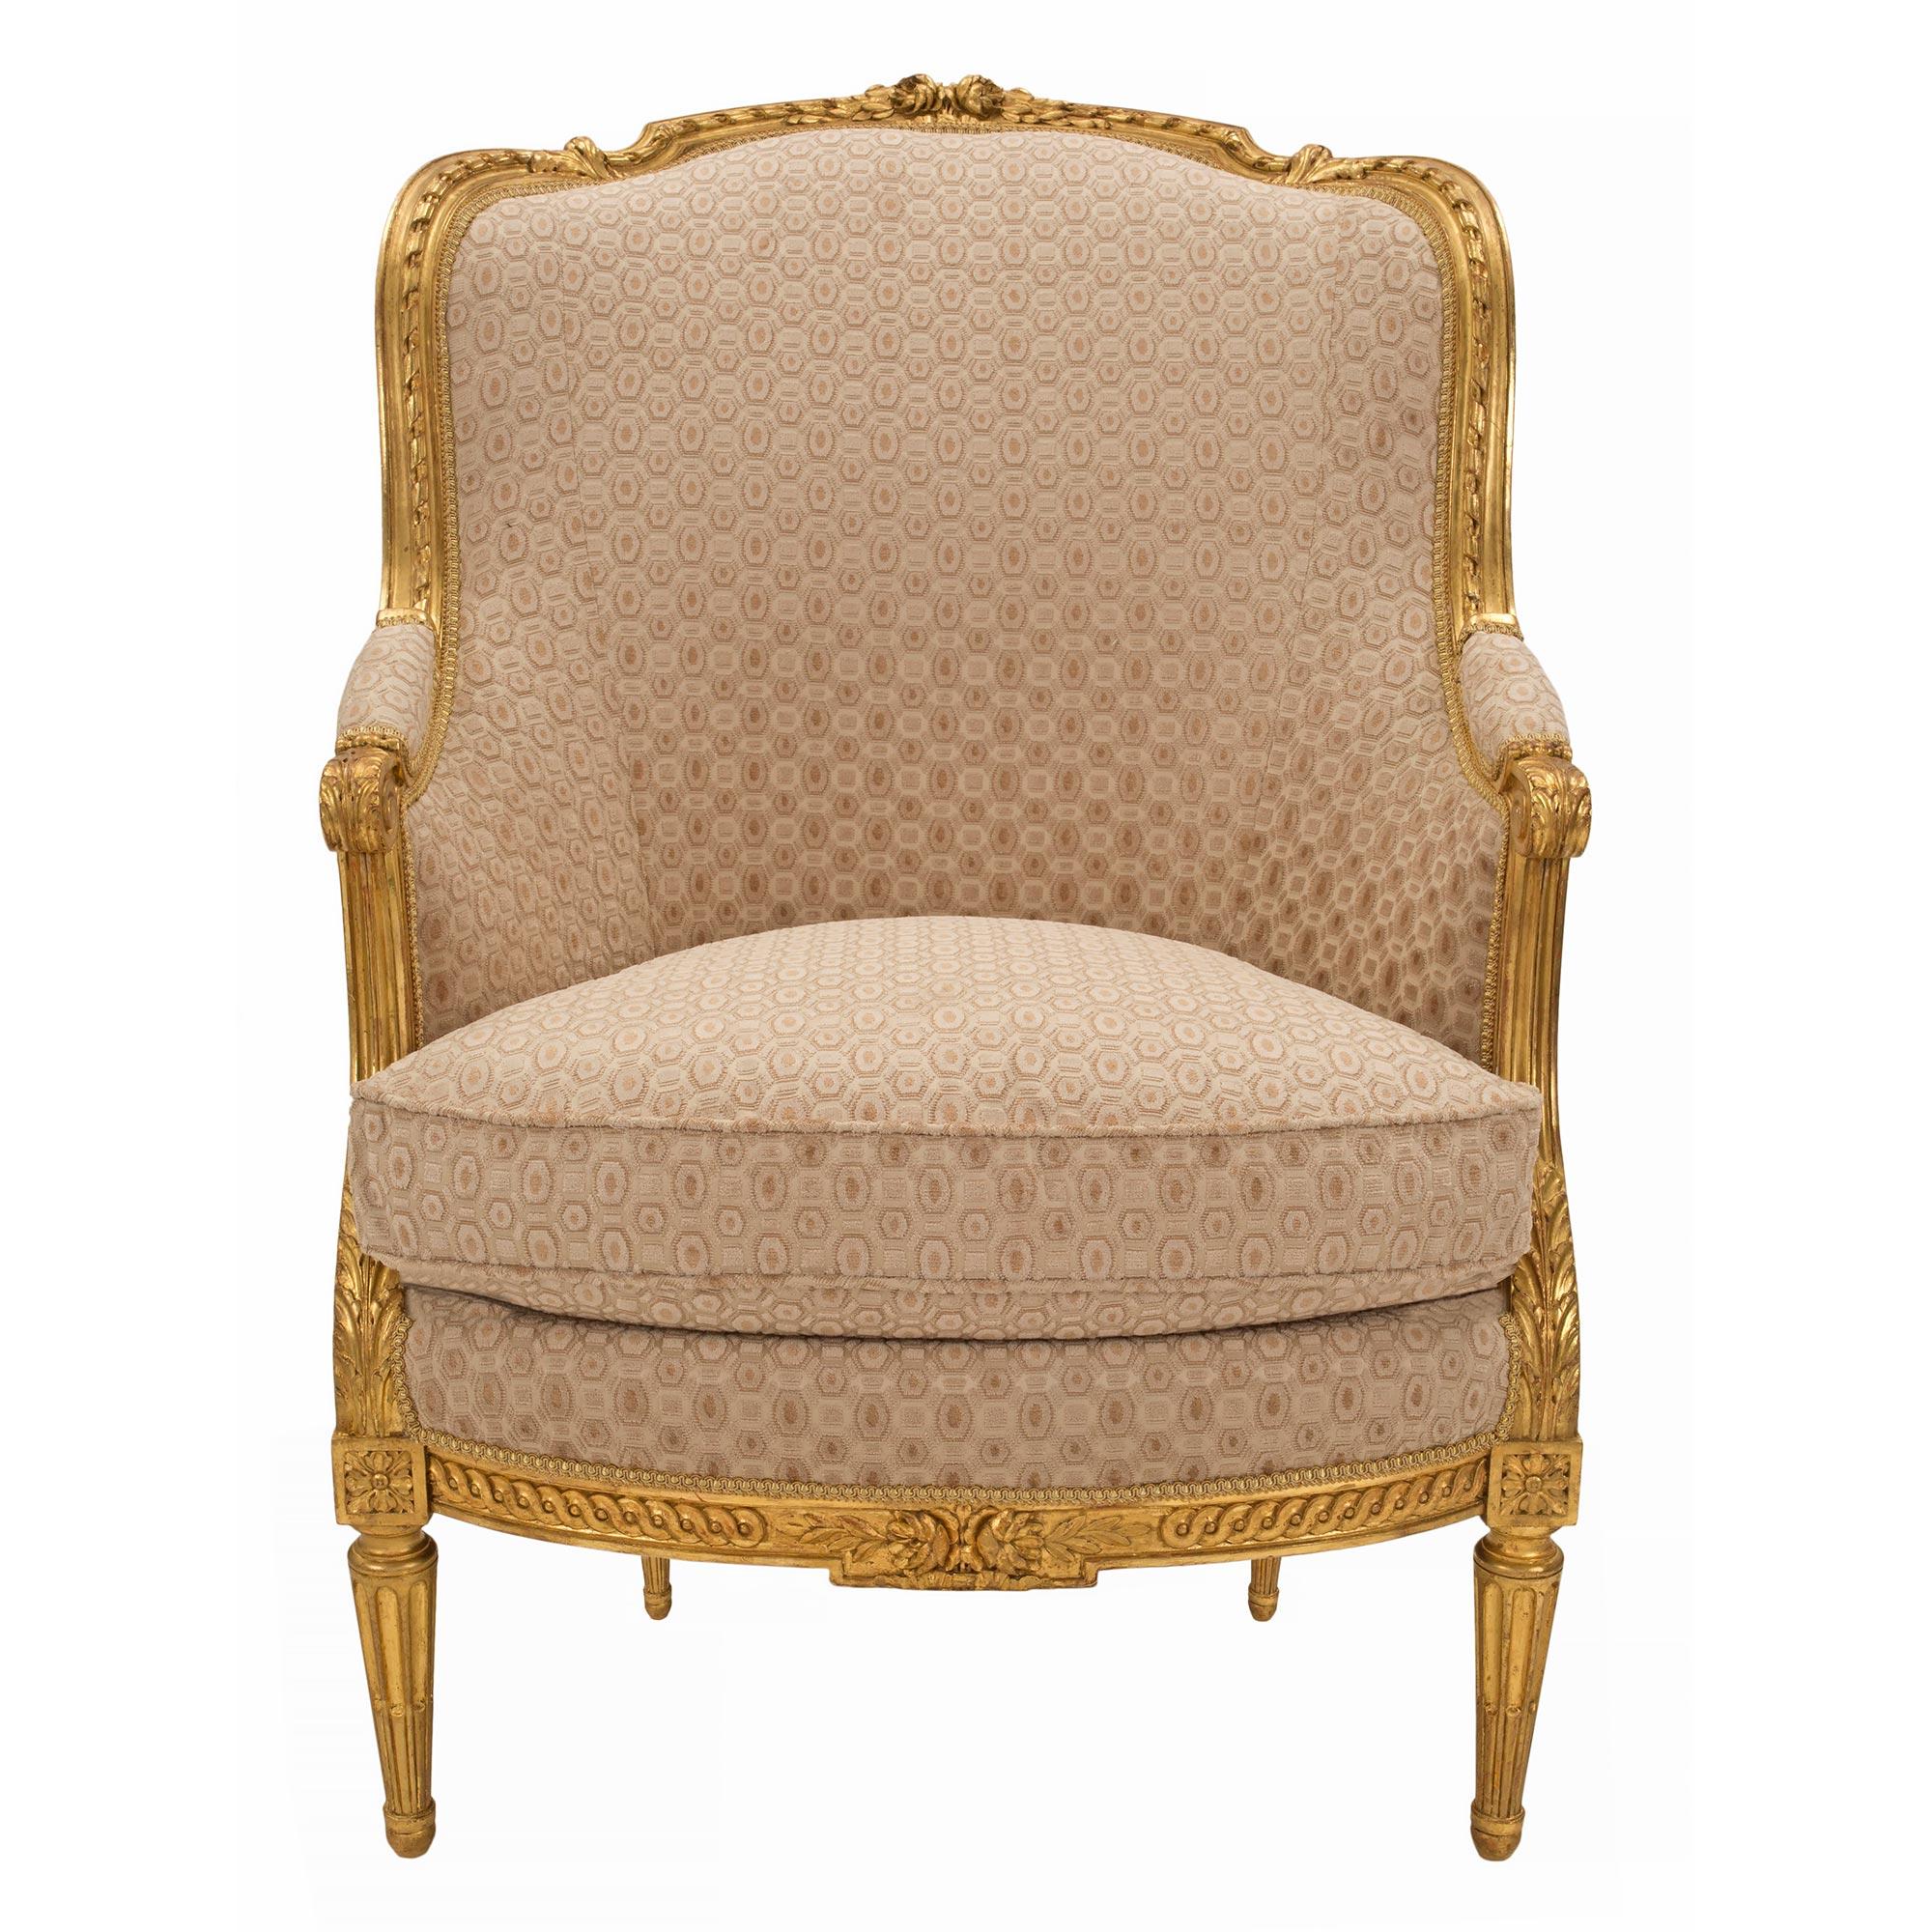 A striking pair of French 19th century Louis XVI st. giltwood Bergères à Oreilles. Each armchair is raised by circular tapered fluted legs below fine block rosettes. Extending along the frieze are impressive and wonderfully carved interlocking